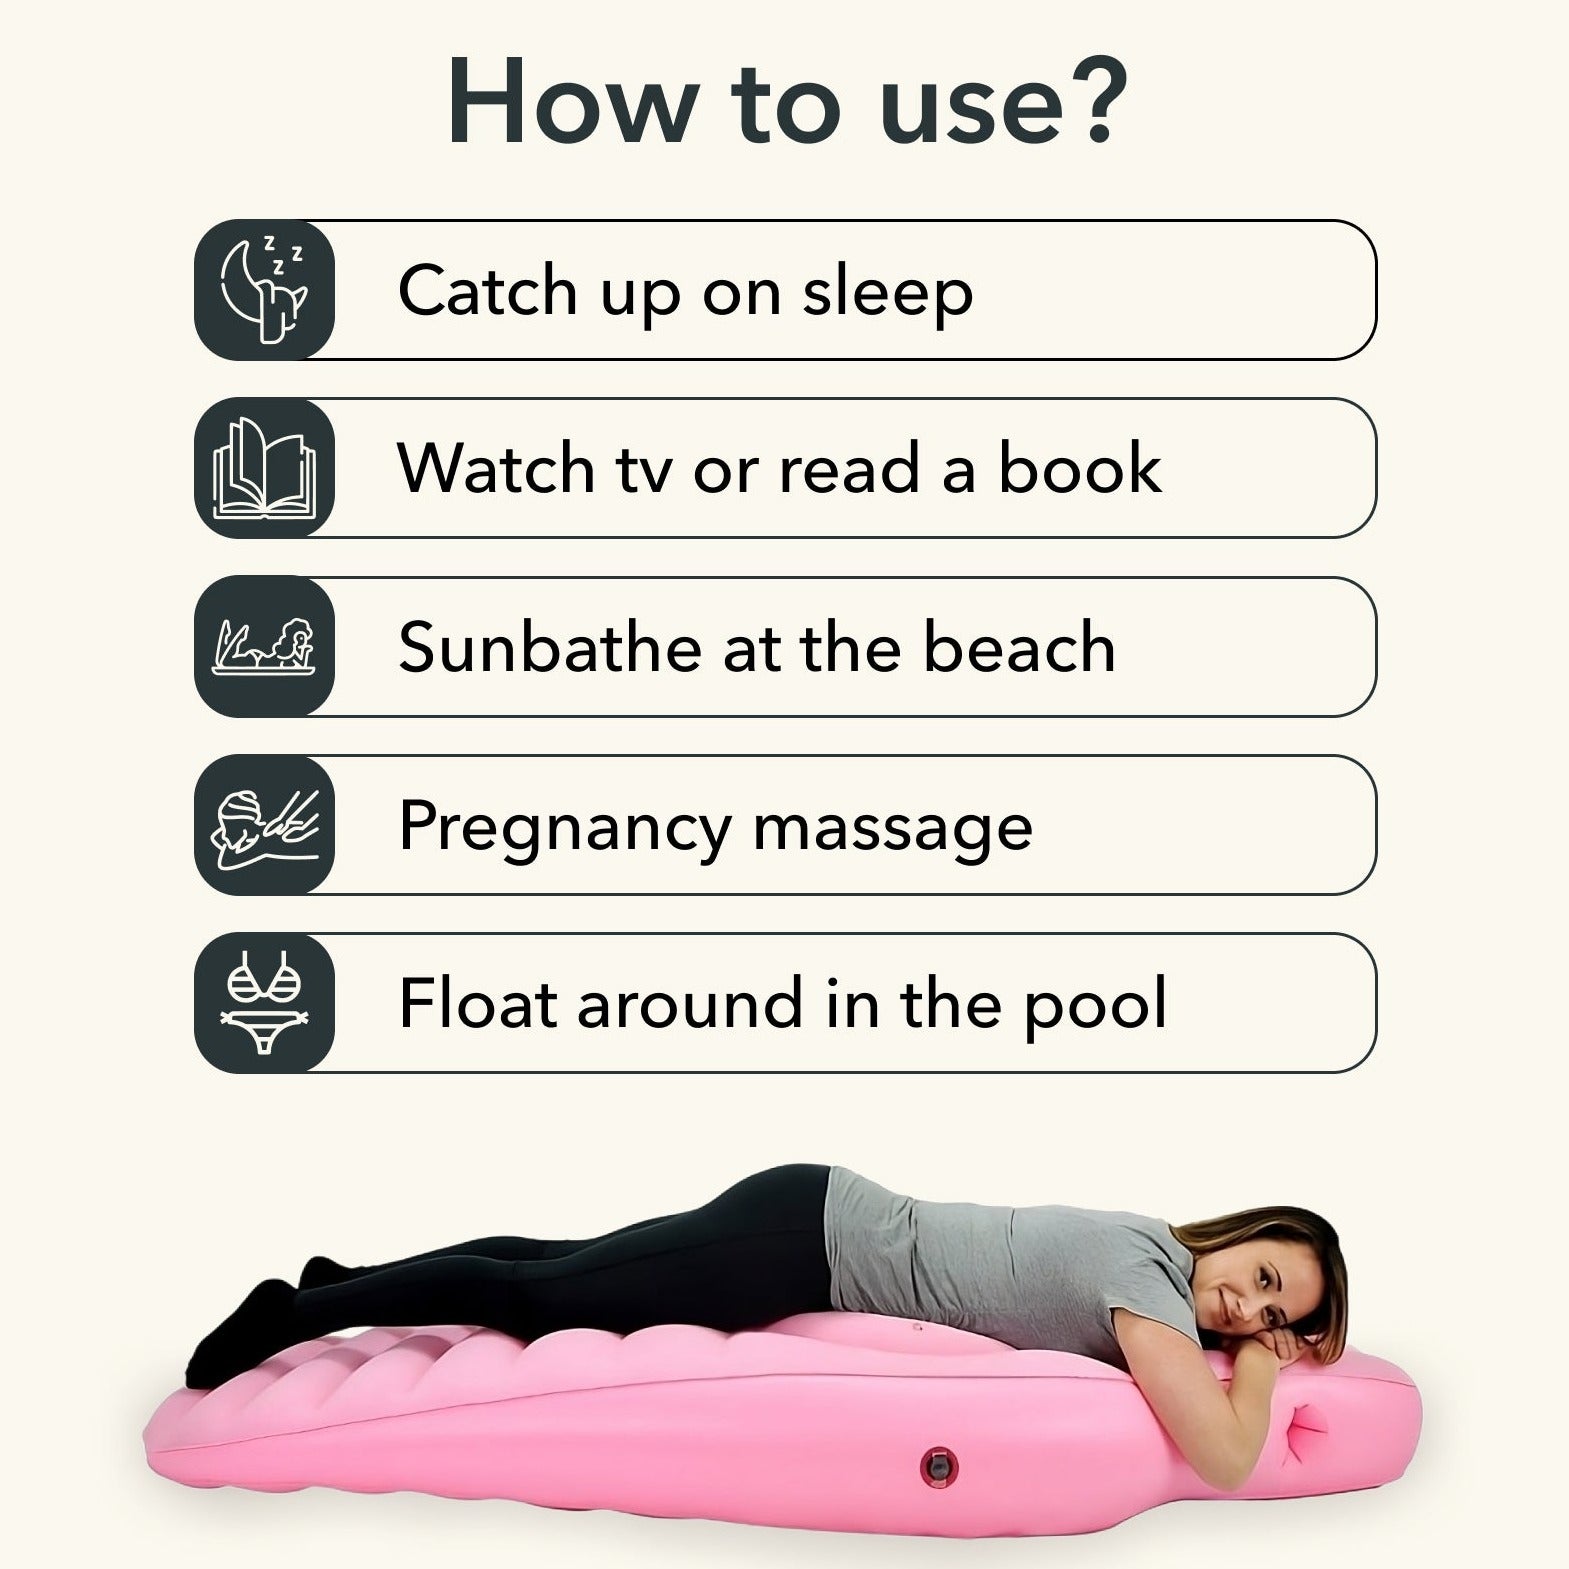 How to use Maternity Mattress by MOMYLIFE. #momylife